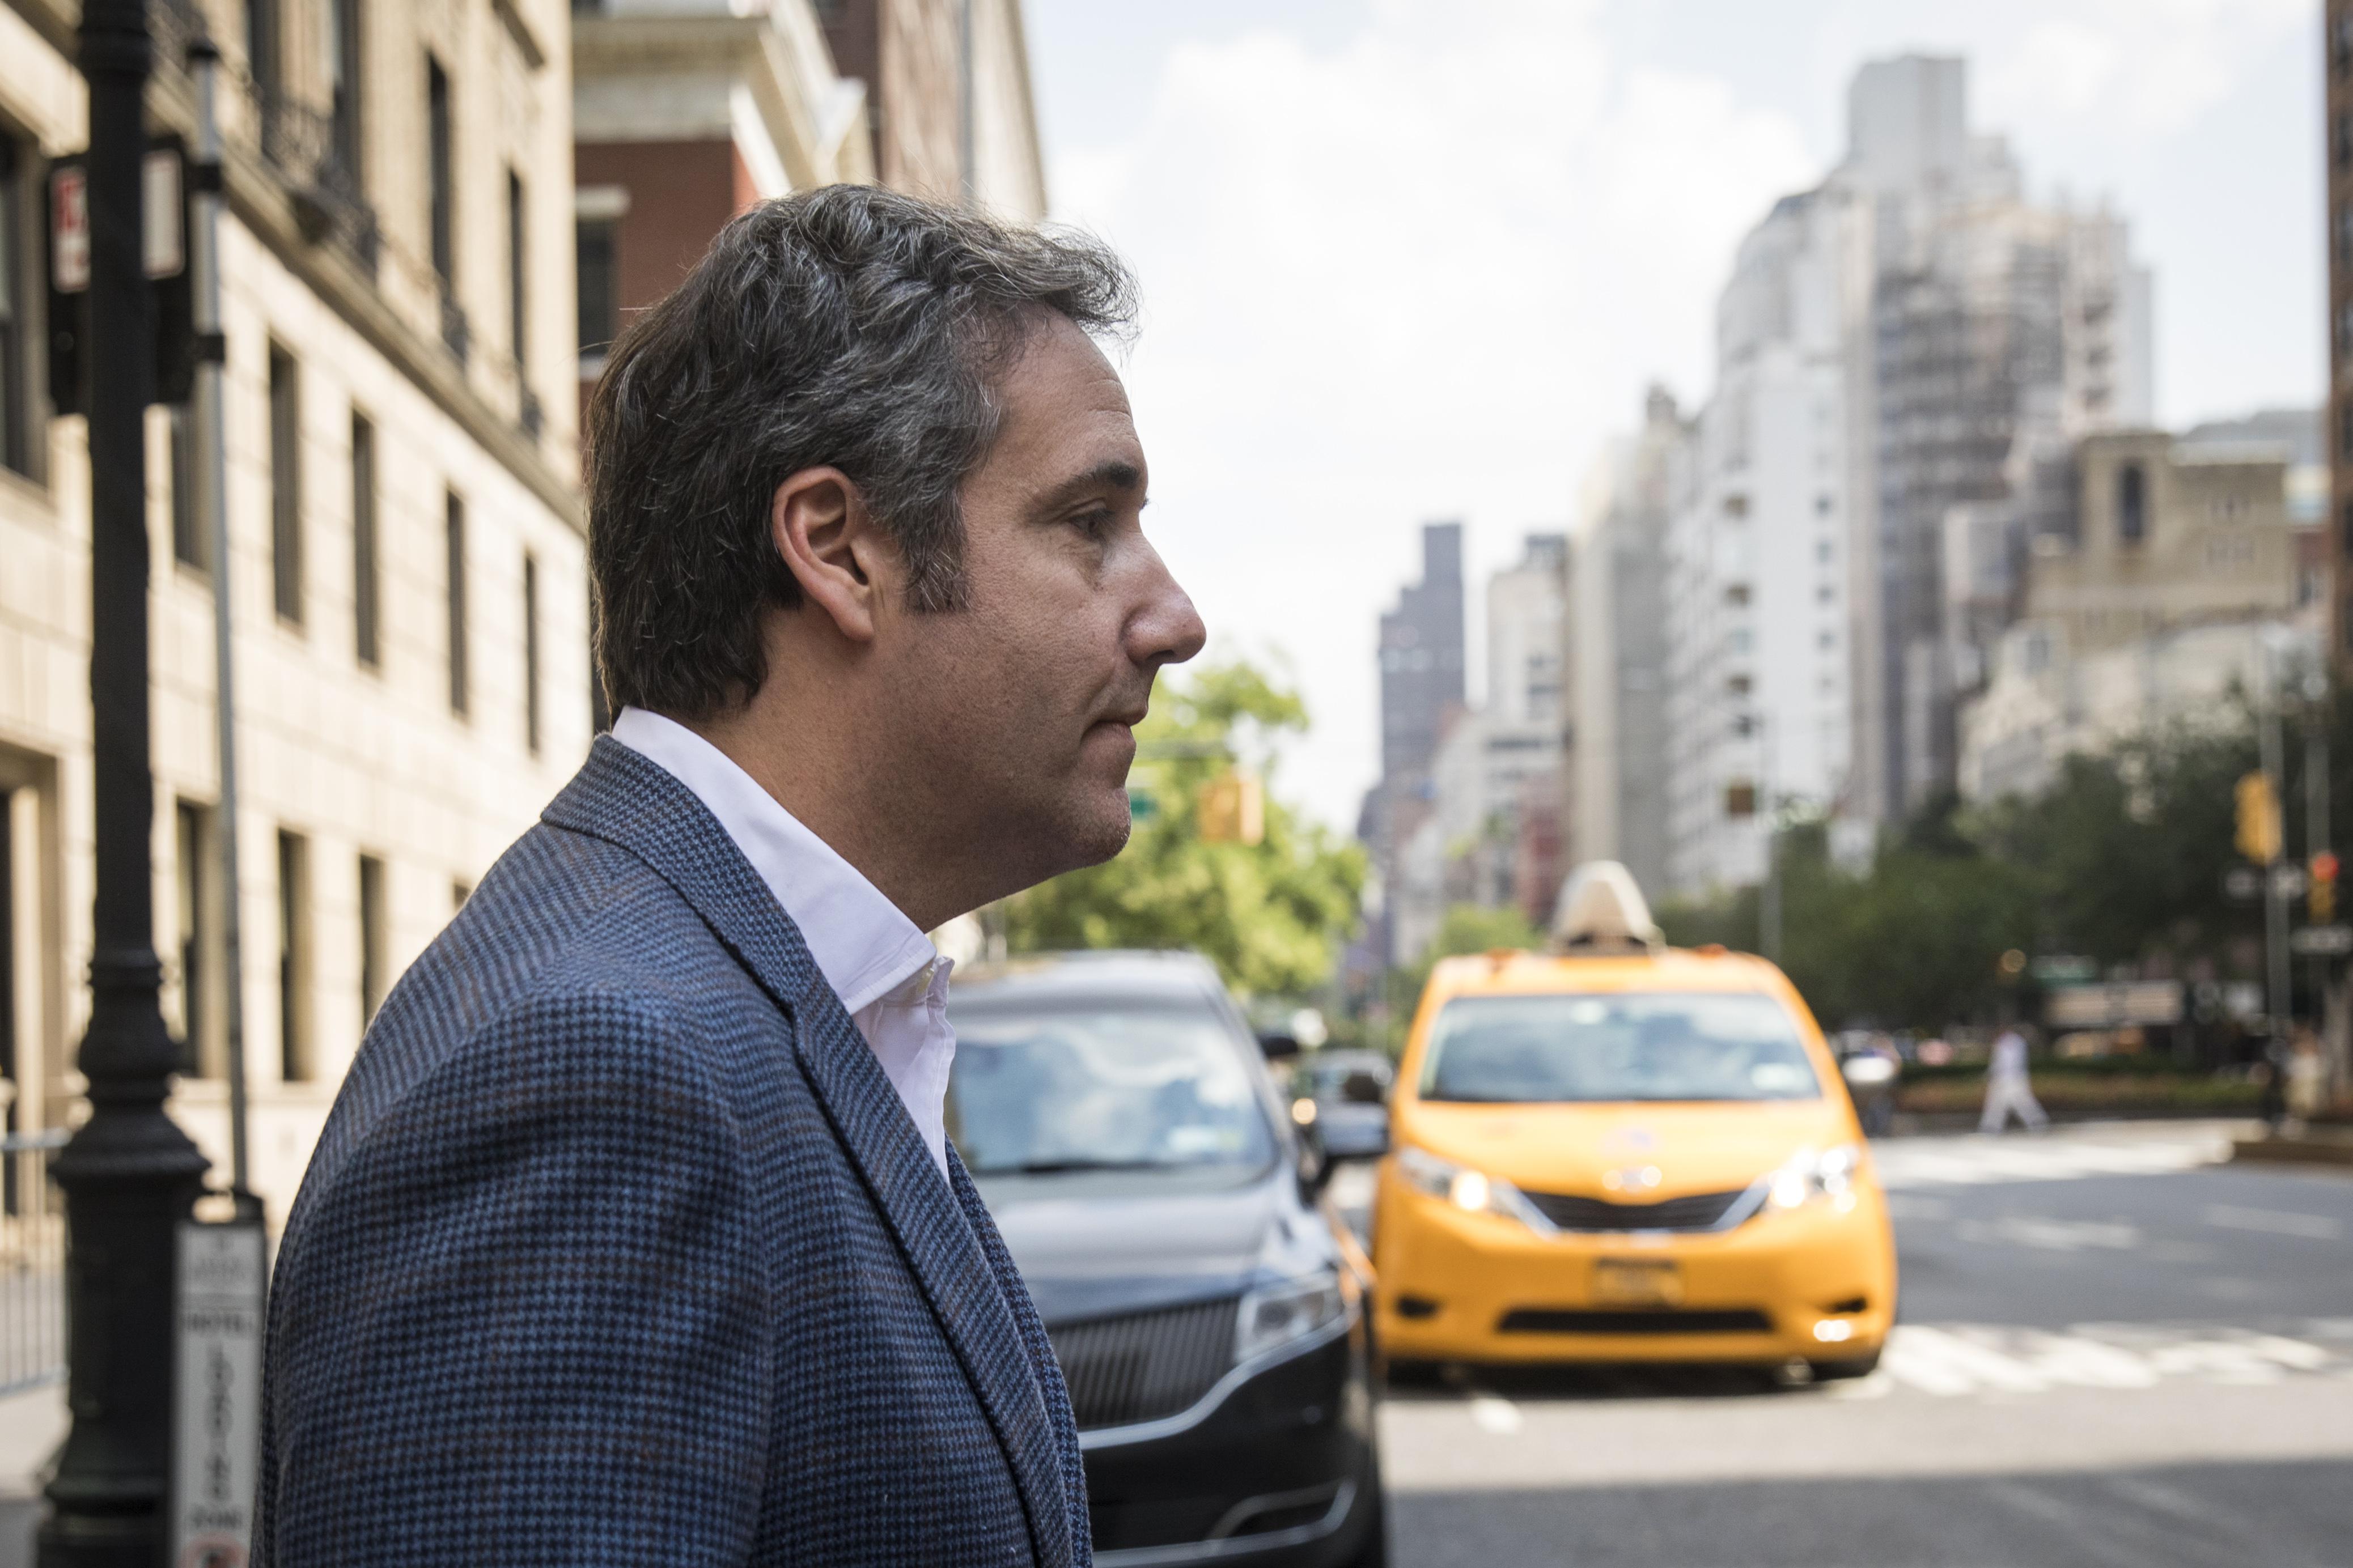 Michael Cohen walks on a New York City street in front of a yellow taxi cab.